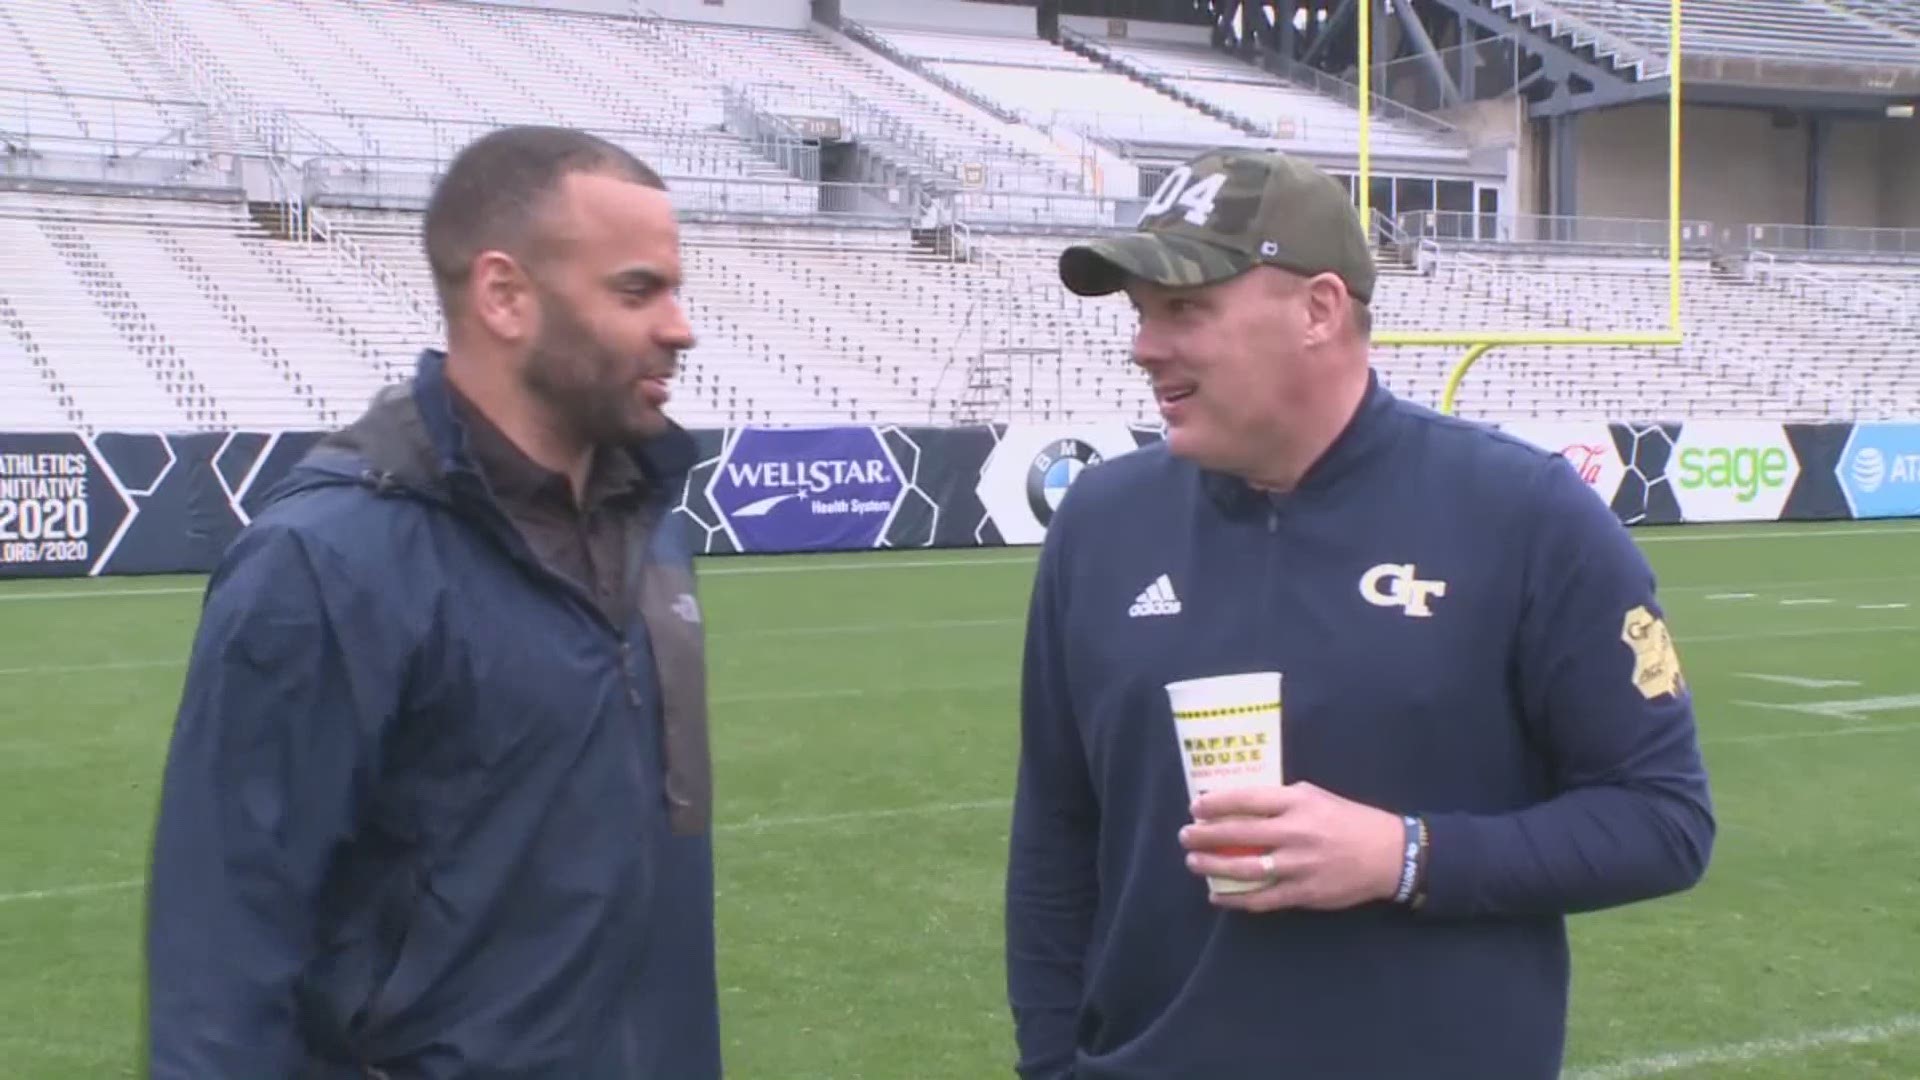 11Alive Sports had a one-on-one chat with Geoff Collins, the new coach at Georgia Tech, right after Signing Day.